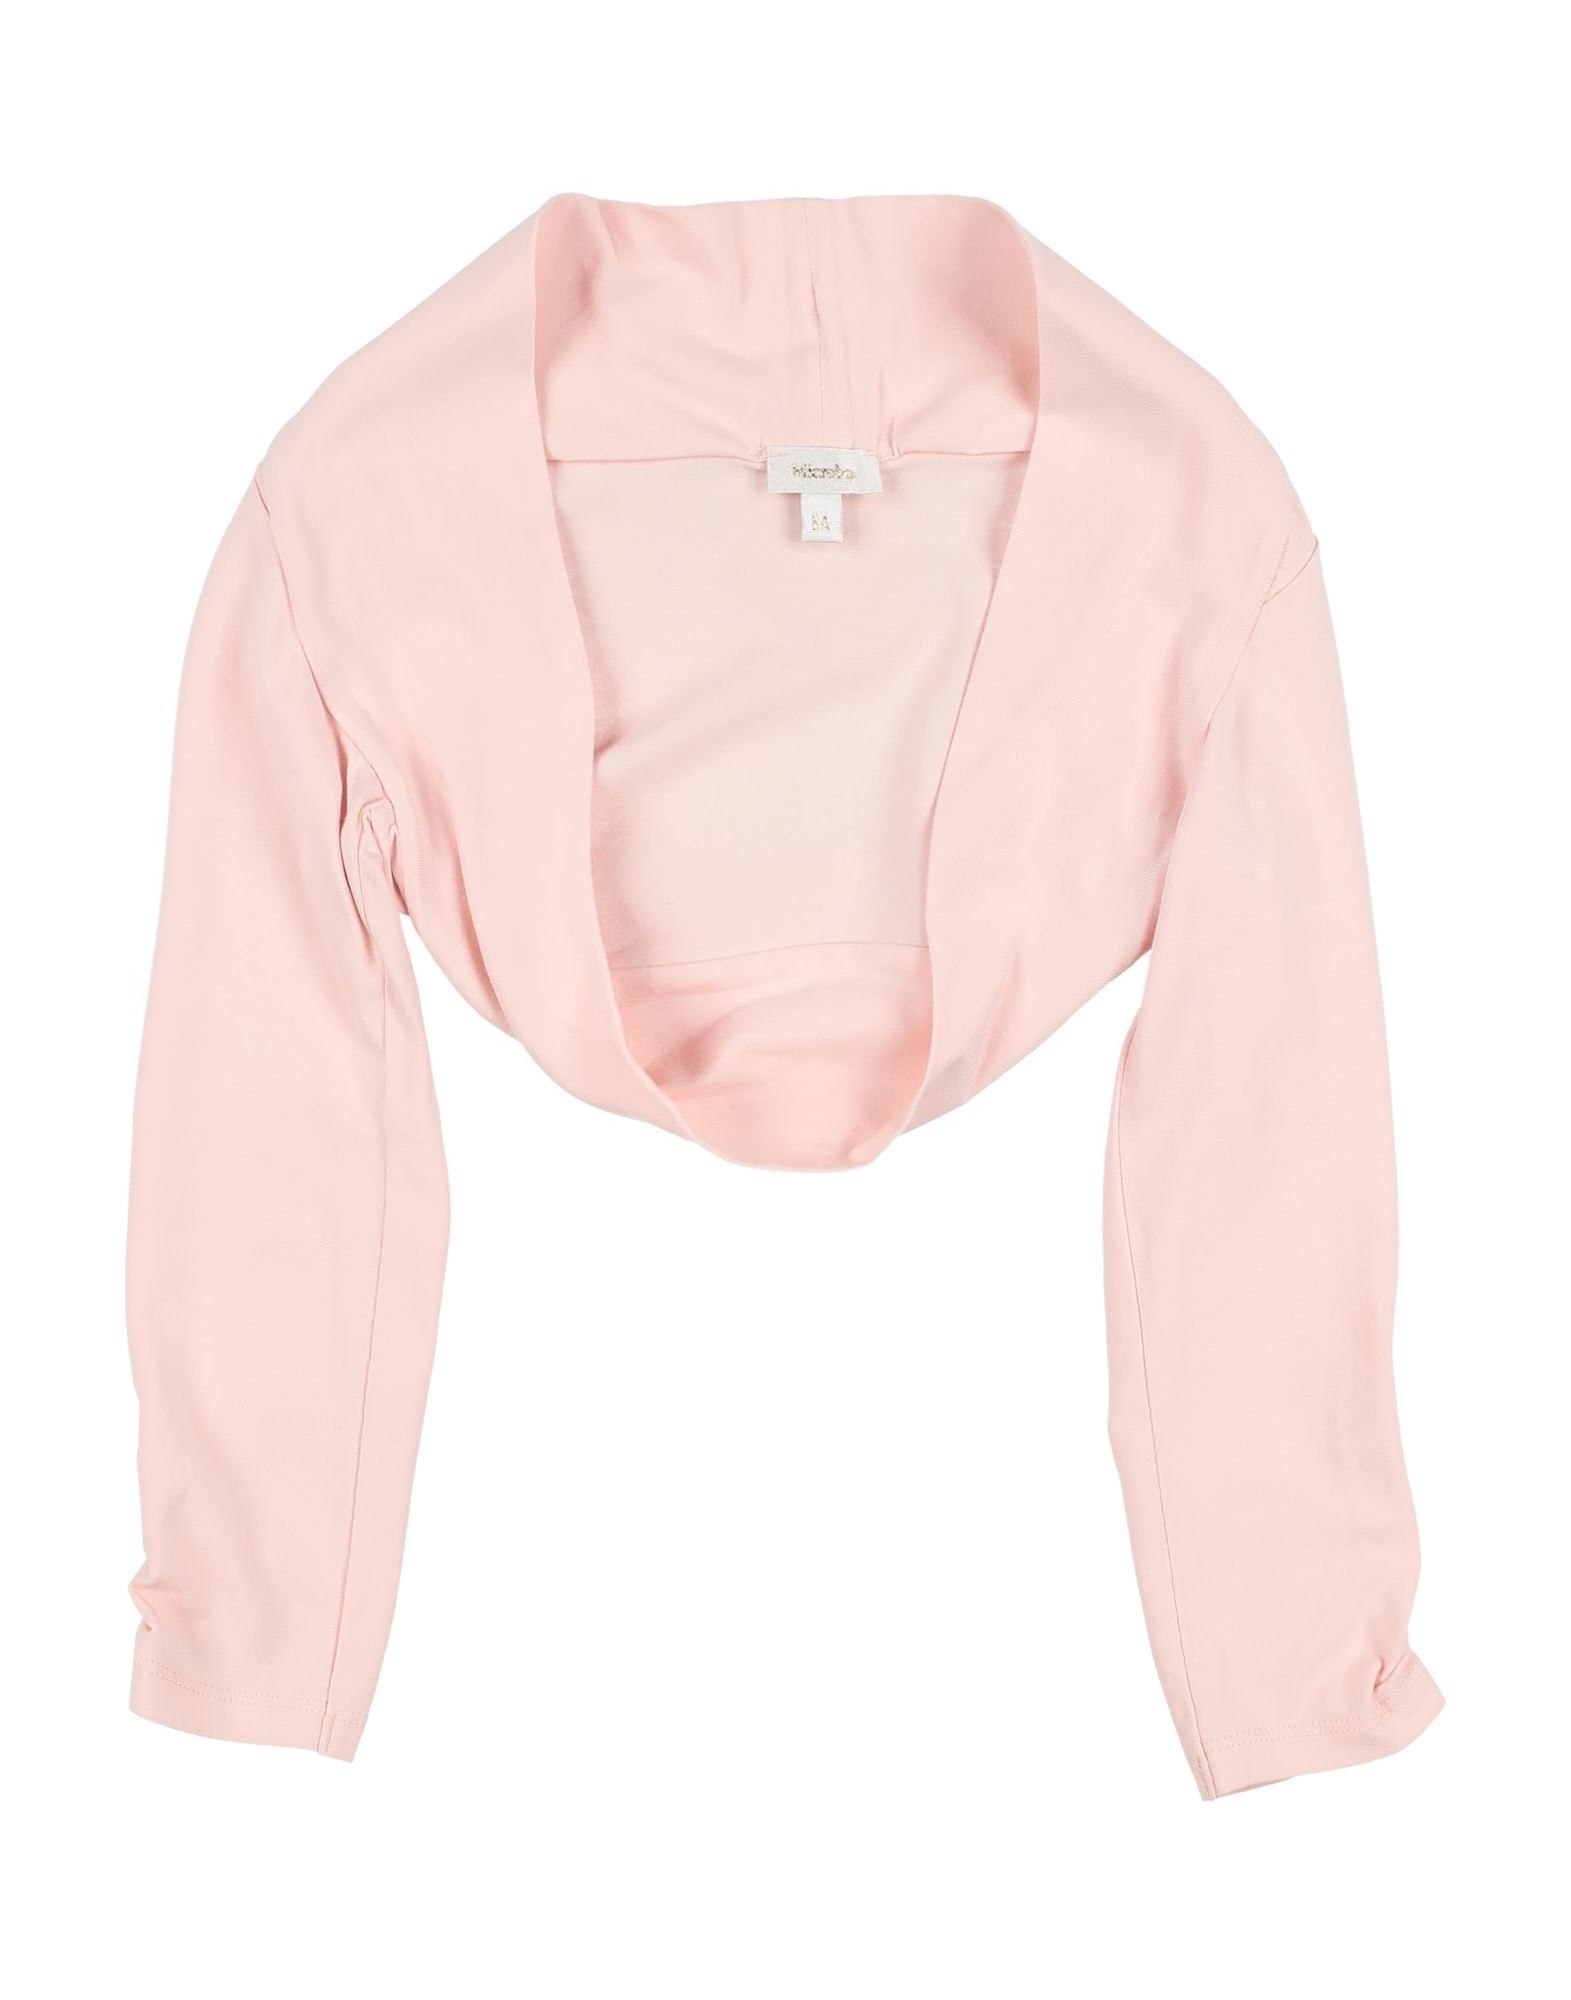 MICROBE by MISS GRANT Wickelpullover Kinder Rosa von MICROBE by MISS GRANT